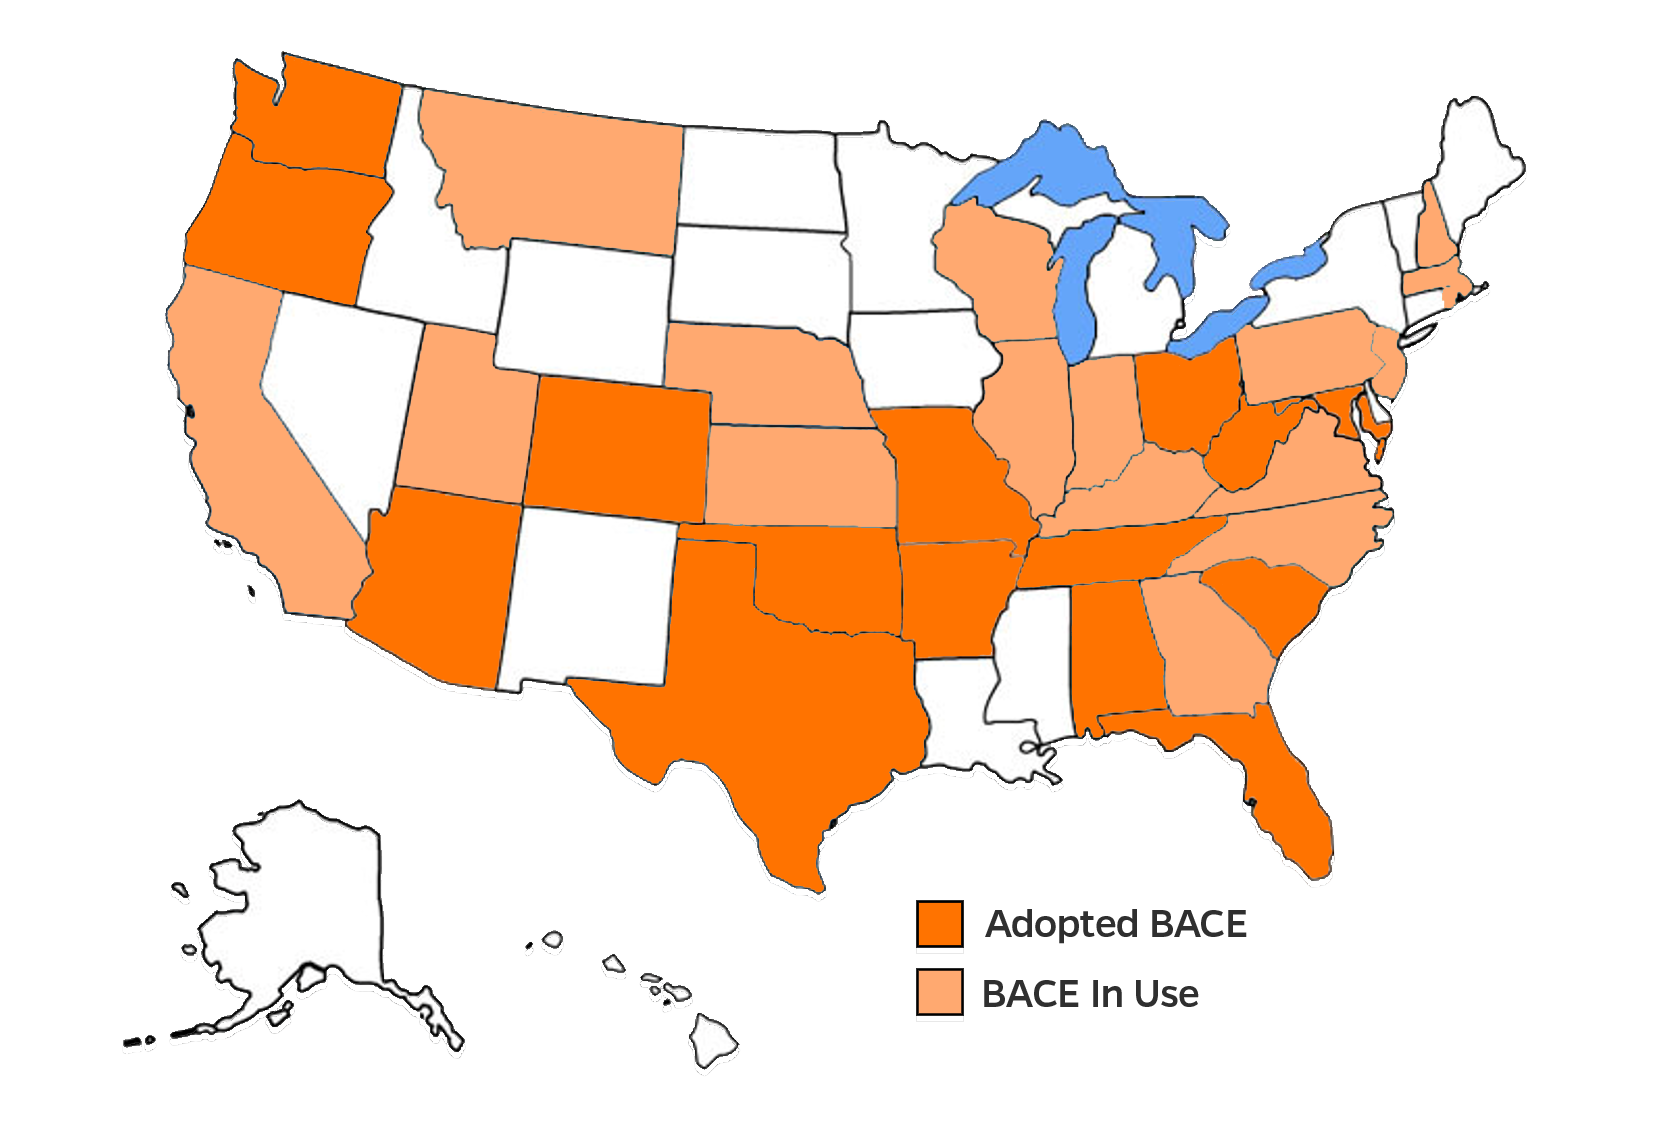 US map with states highlighted in orange that have adopted or are using the BACE (about half the US)